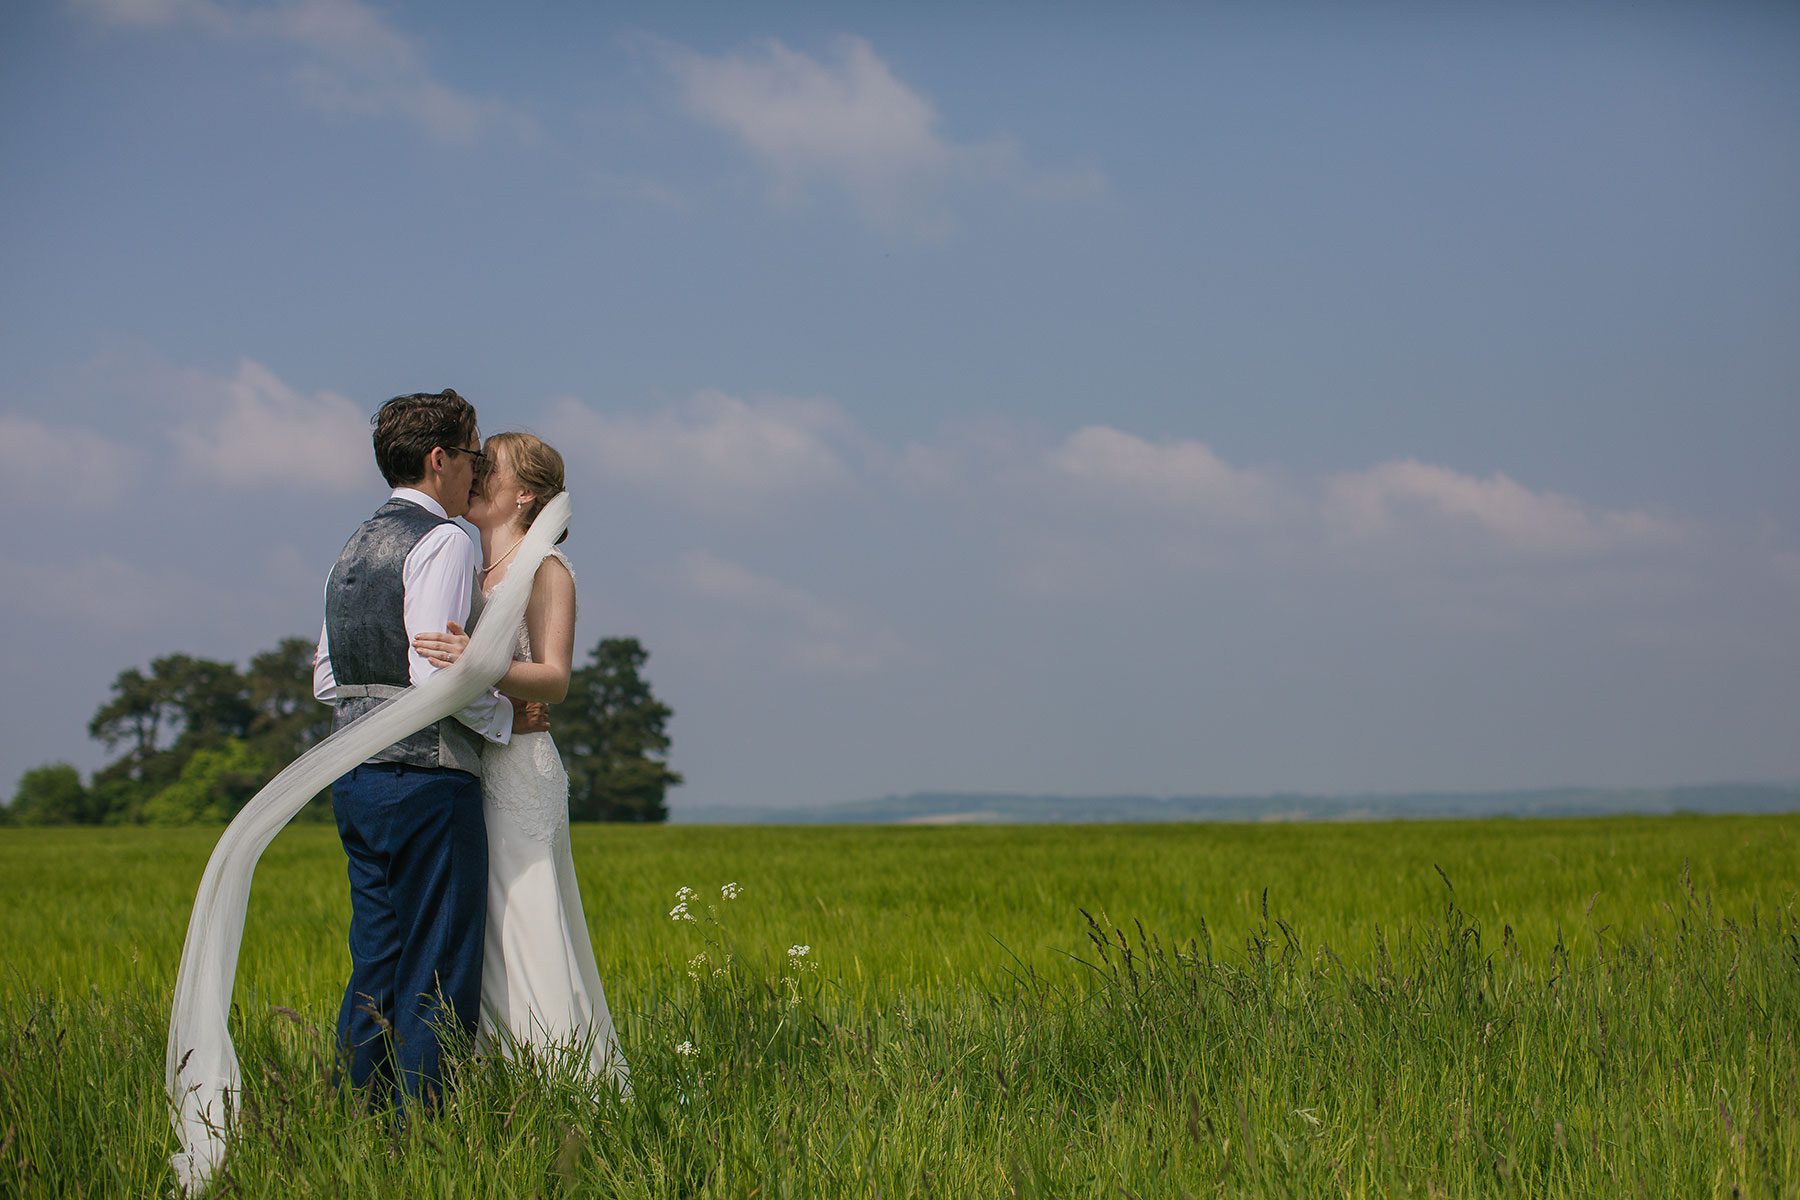 Field Kiss - Reportage Wedding Photography in Cheltenham, Gloucestershire & the Cotswolds | Bullit Photography.